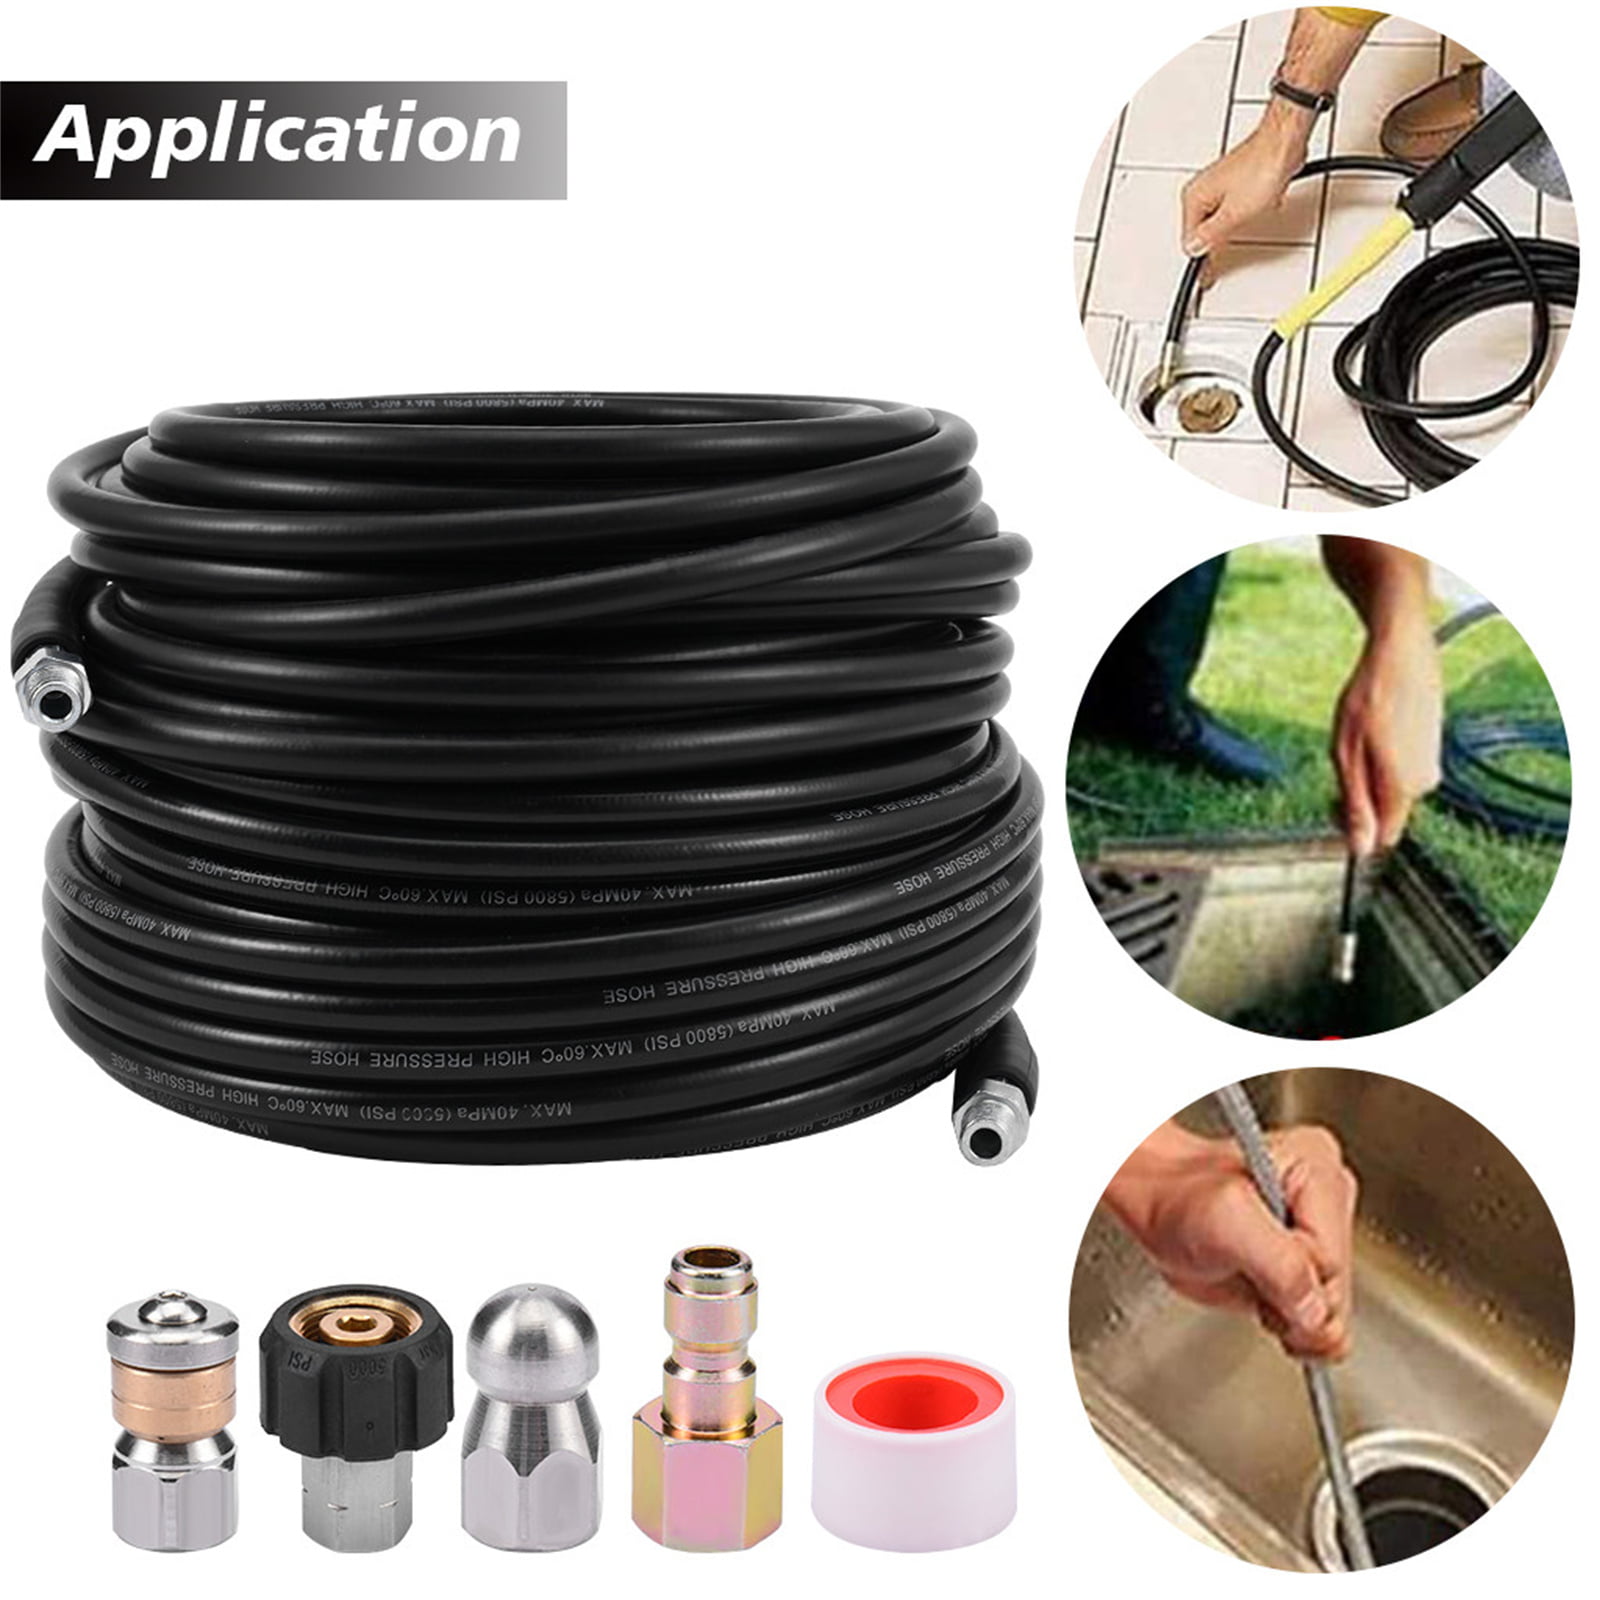 Button High Pressure Washer Sewer Jetter Kit-50 FT 3000 PSI Drain Cleaning Hose 